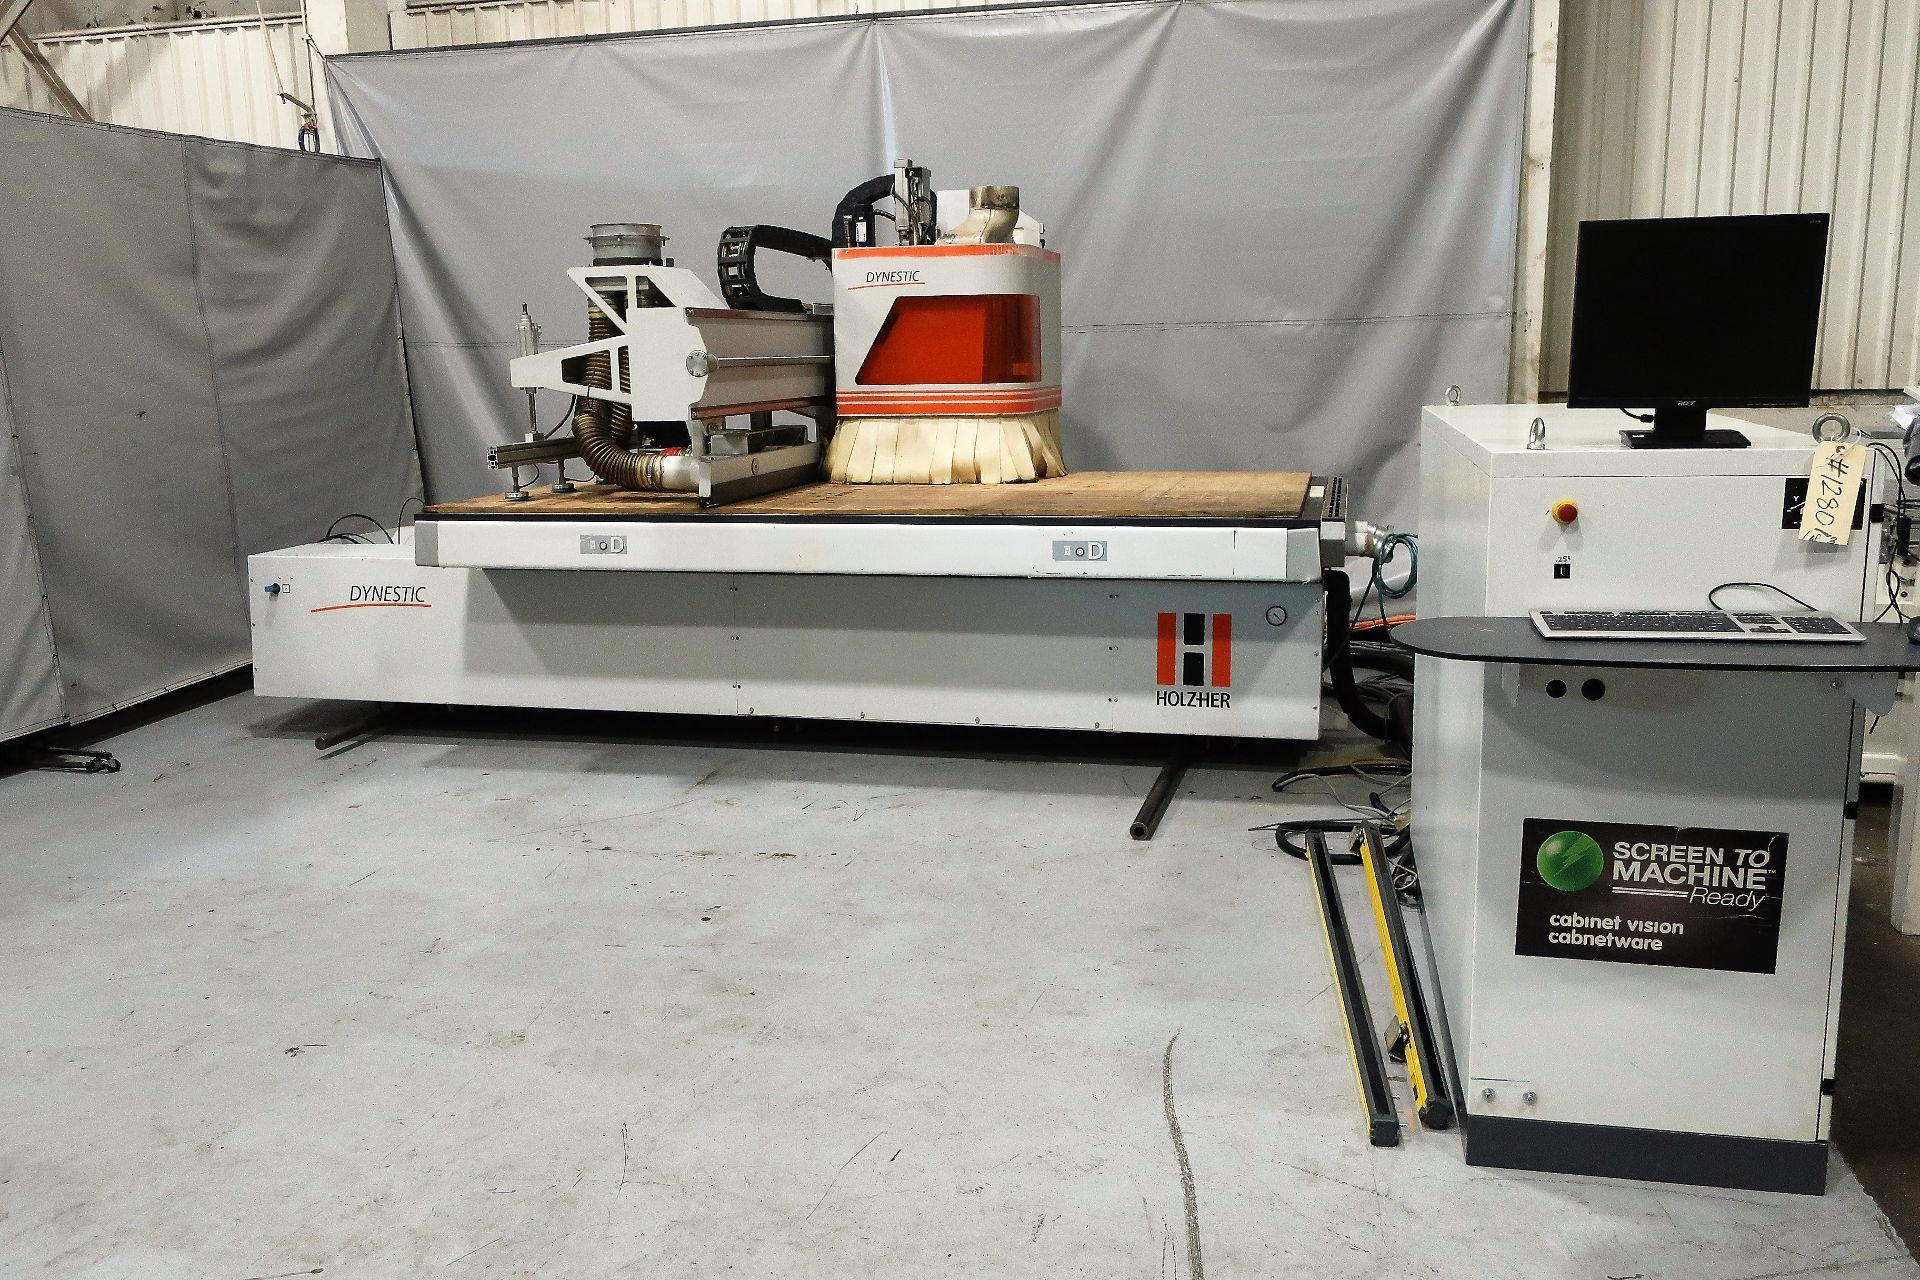 HOLZHER DYNESTIC 7516 5'X10' CNC ROUTER, S/N 27/1-102, NEW 2011